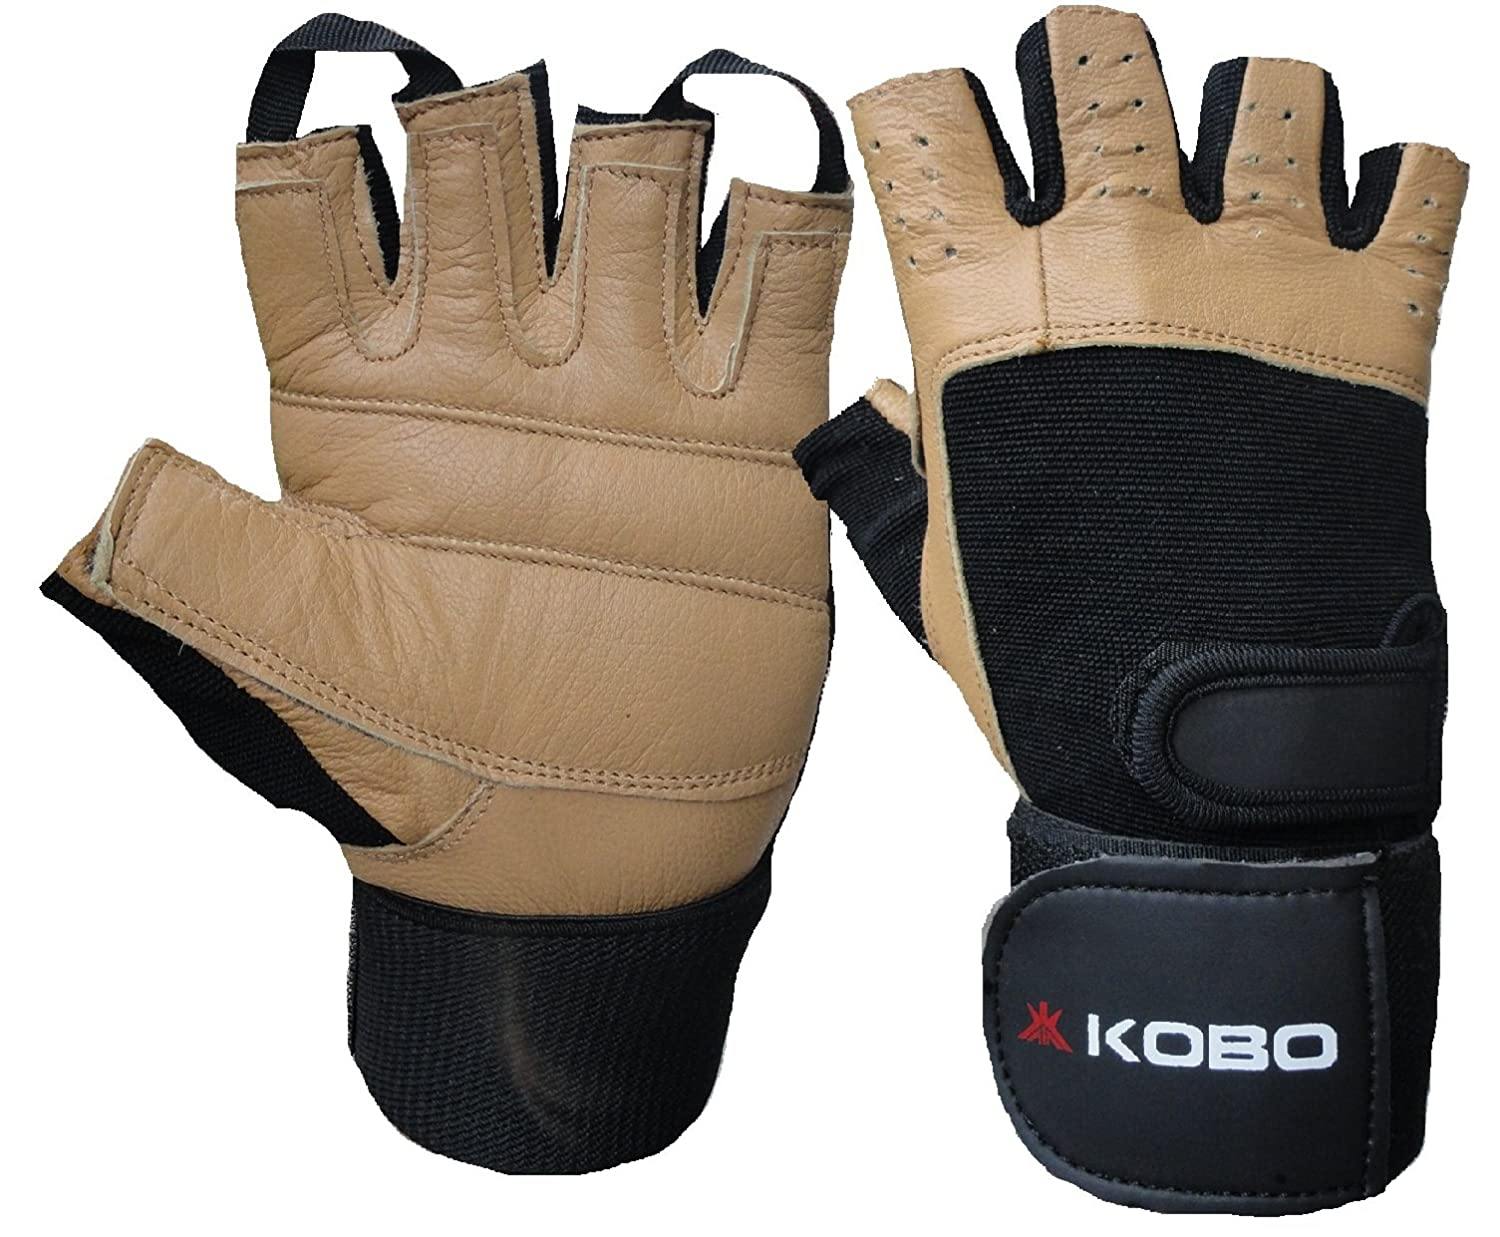 Leather Fitness Gloves/Weight Lifting Gloves/Gym Gloves Brown - Best Price online Prokicksports.com